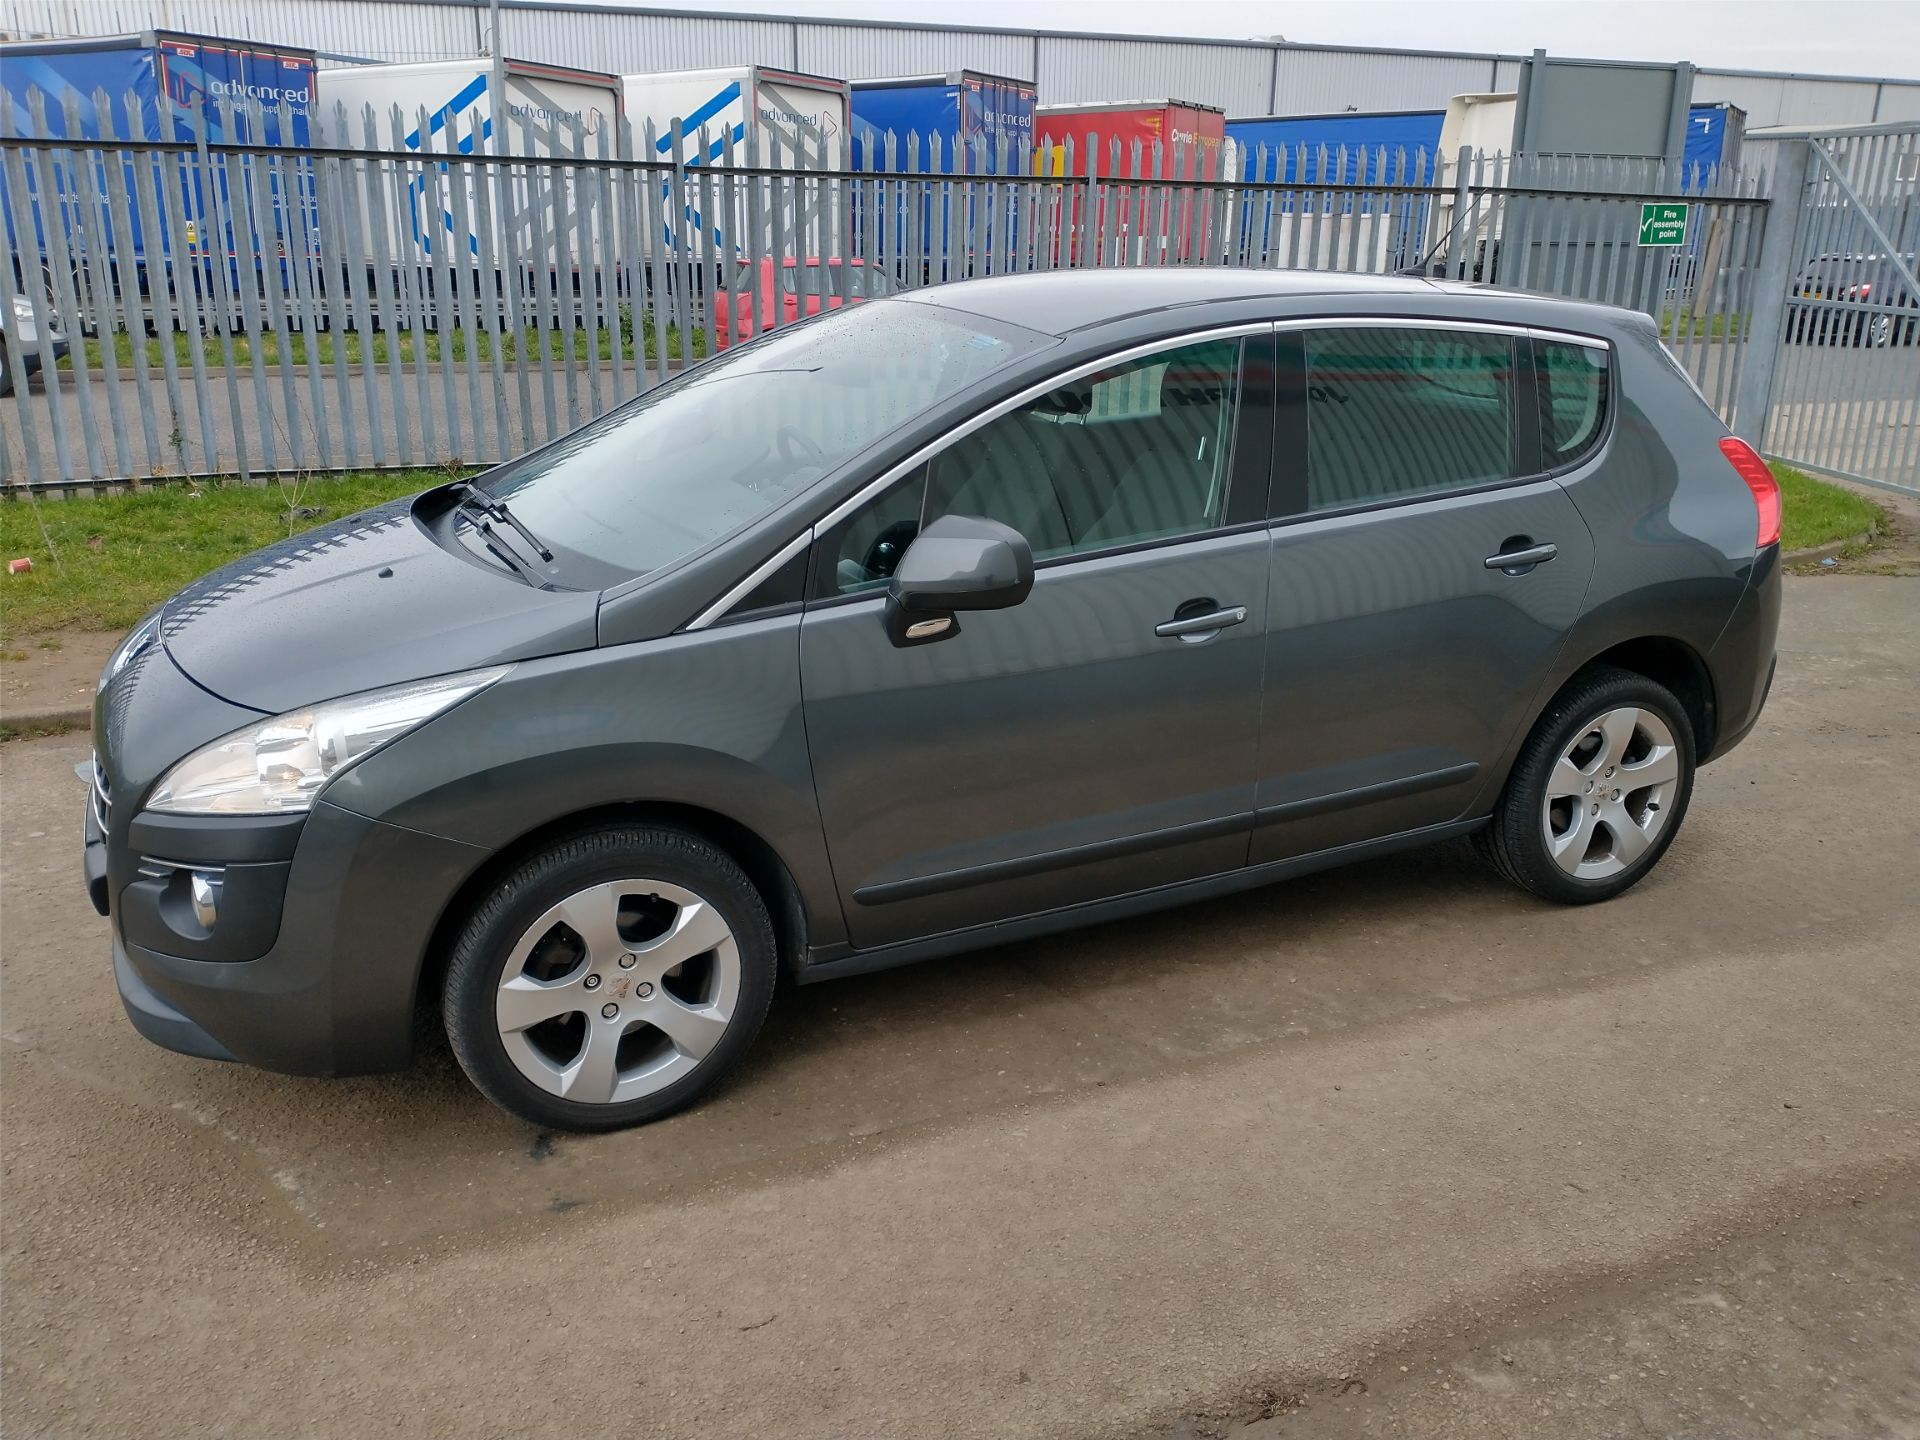 2012 Peugeot 3008 Active HDI 1.6 5DR SUV - CL505 - NO VAT ON THE HAMM - Image 3 of 19